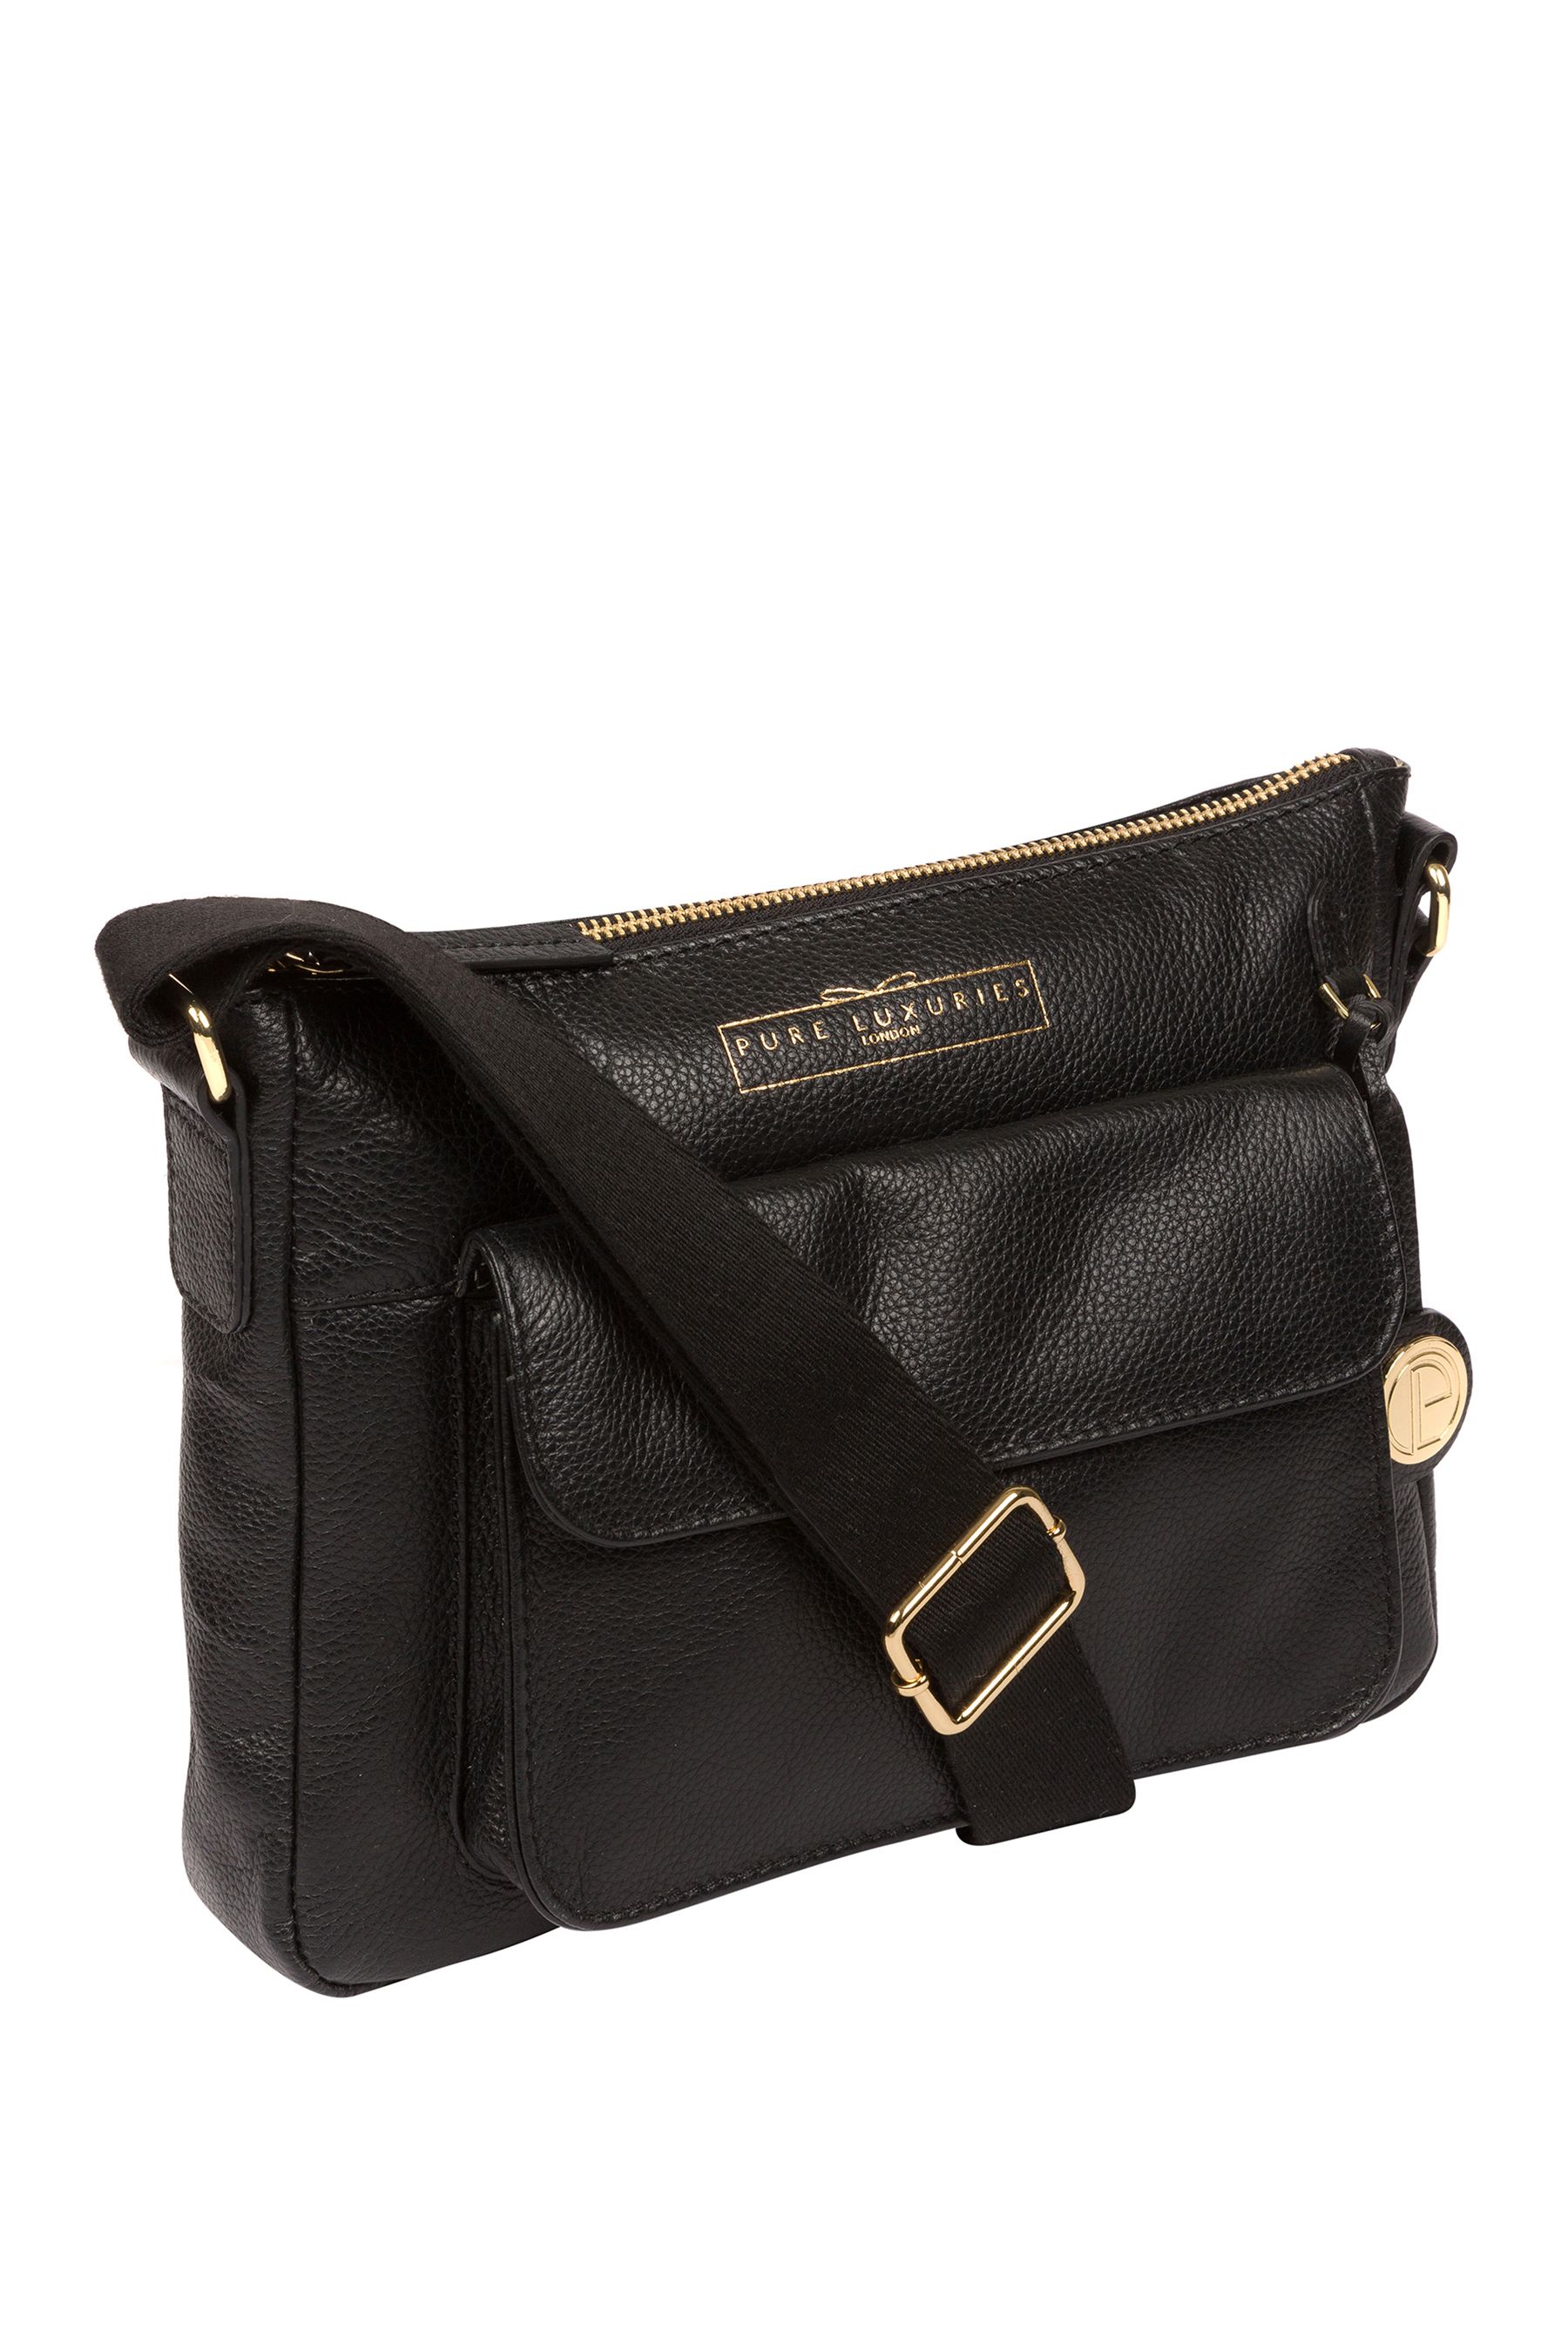 Buy Pure Luxuries London Tindall Leather Shoulder Bag from the Next UK ...